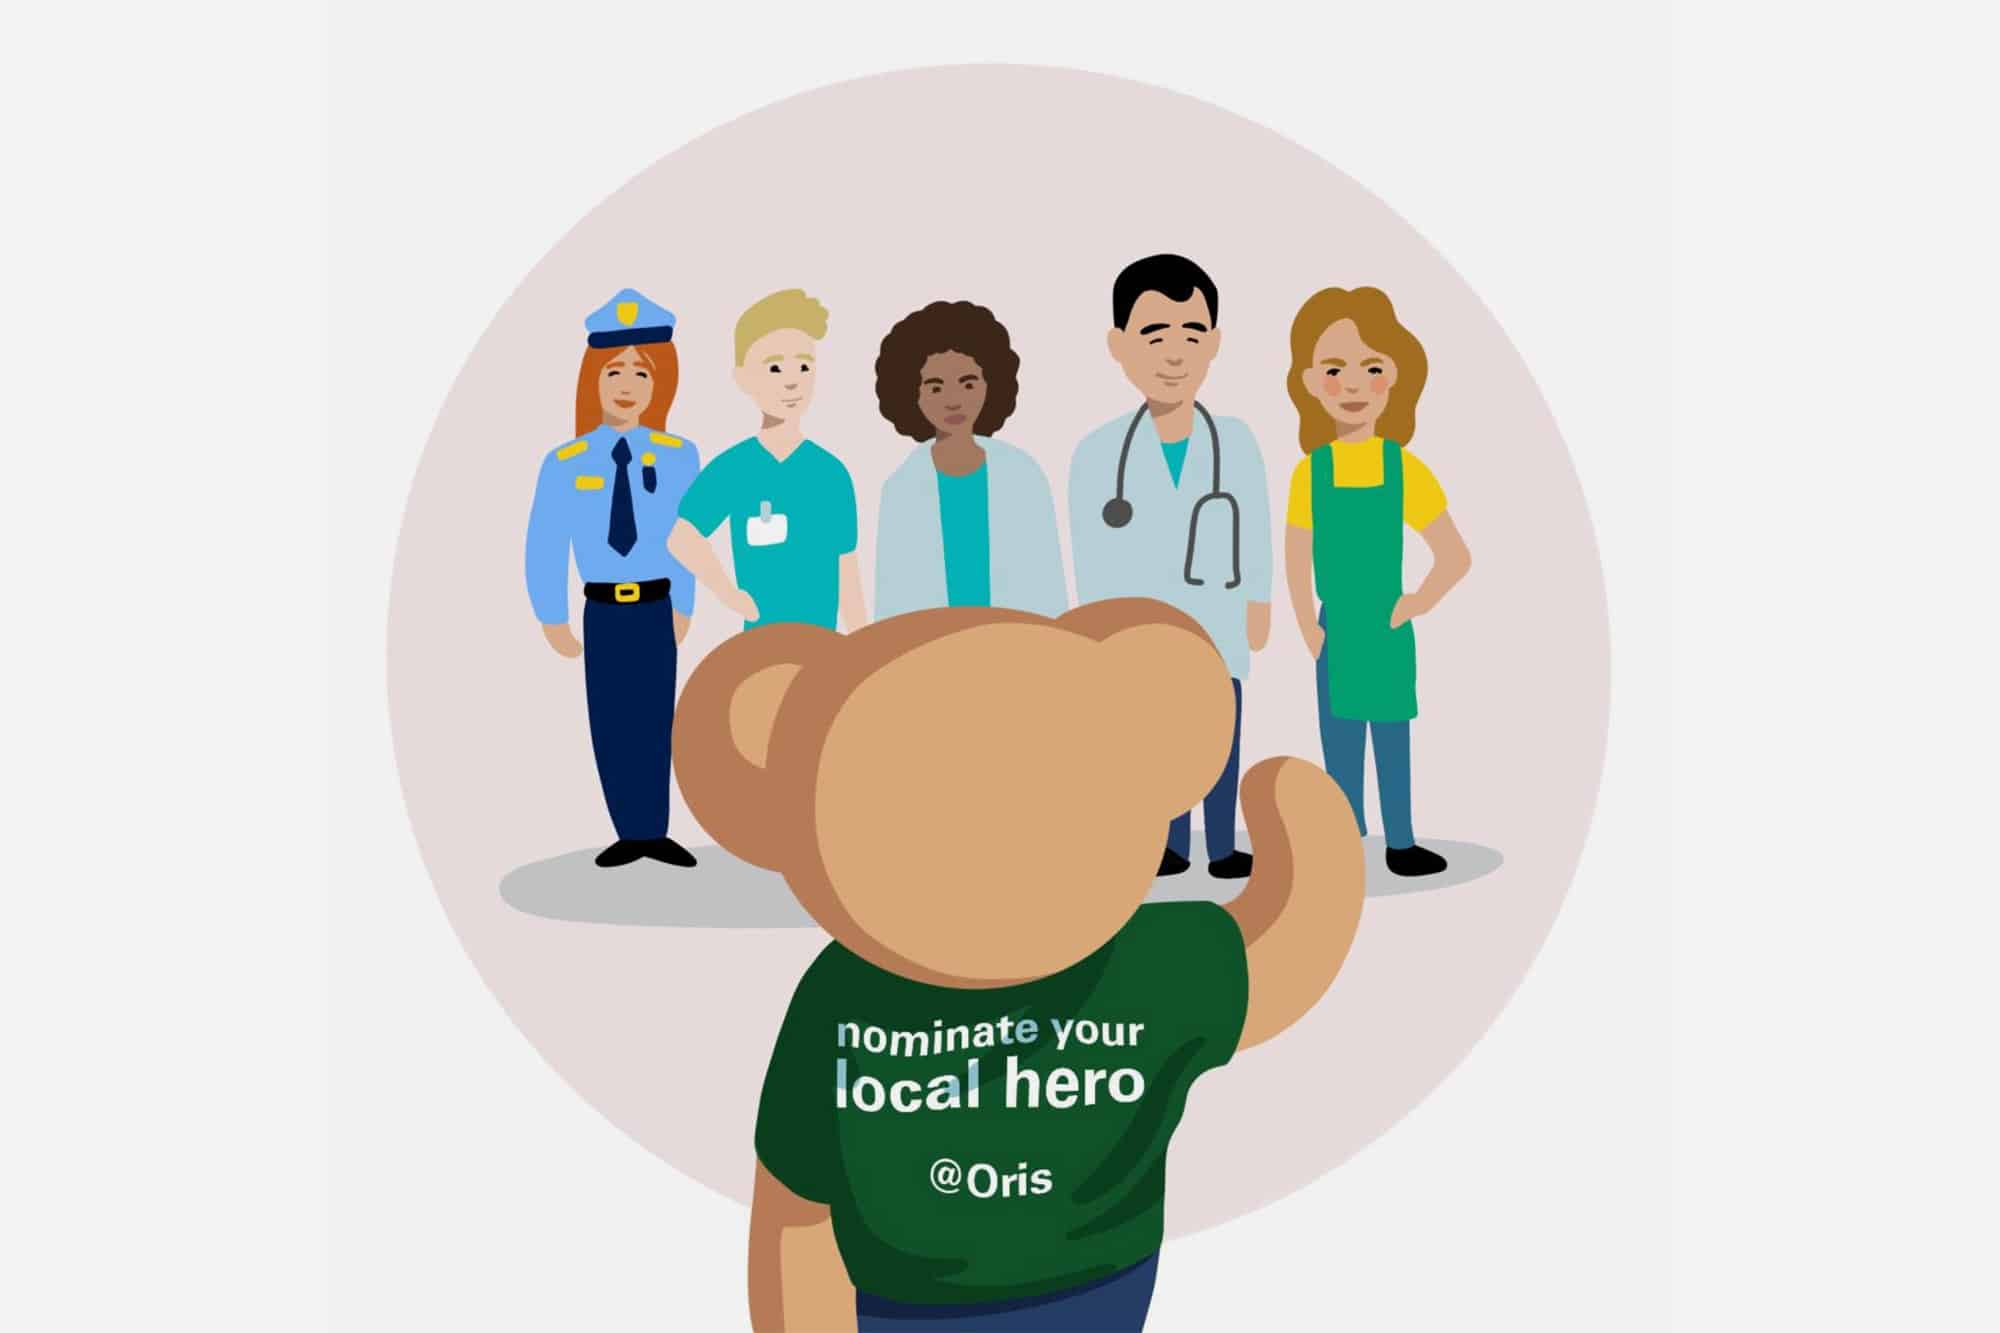 Oris Continues their Local Heroes Campaign to Bring Awareness to the Fight Against Covid-19